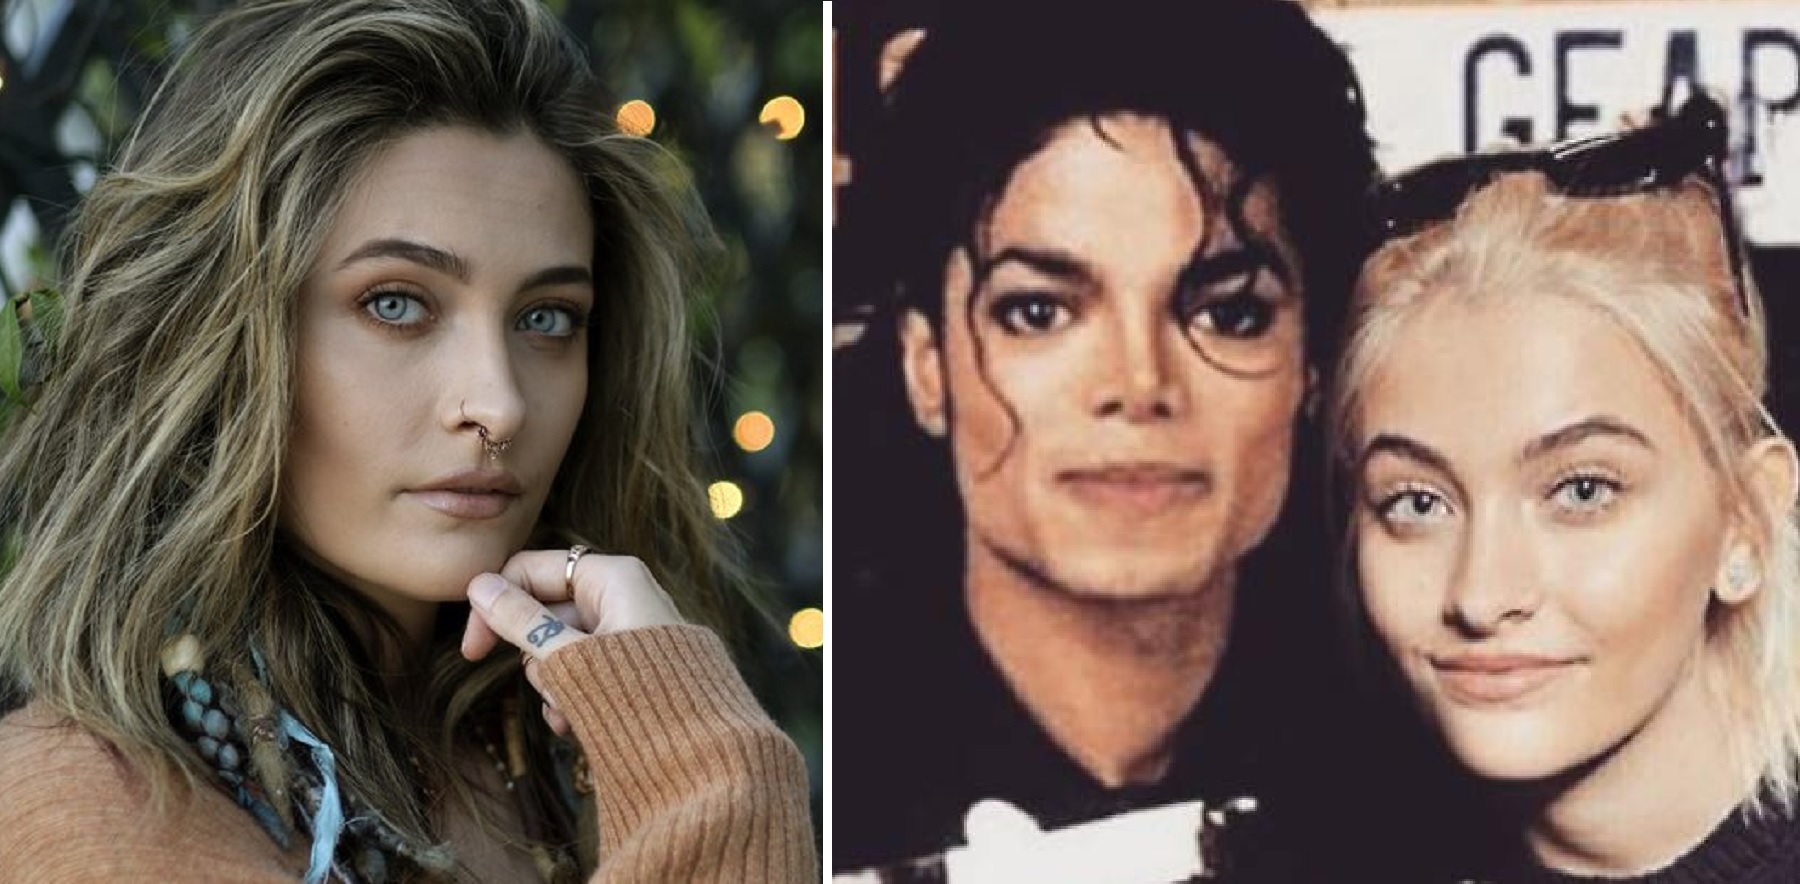 Michael Jackson’s Daughter Paris Releases First Song With Music Video – ‘Let Down’